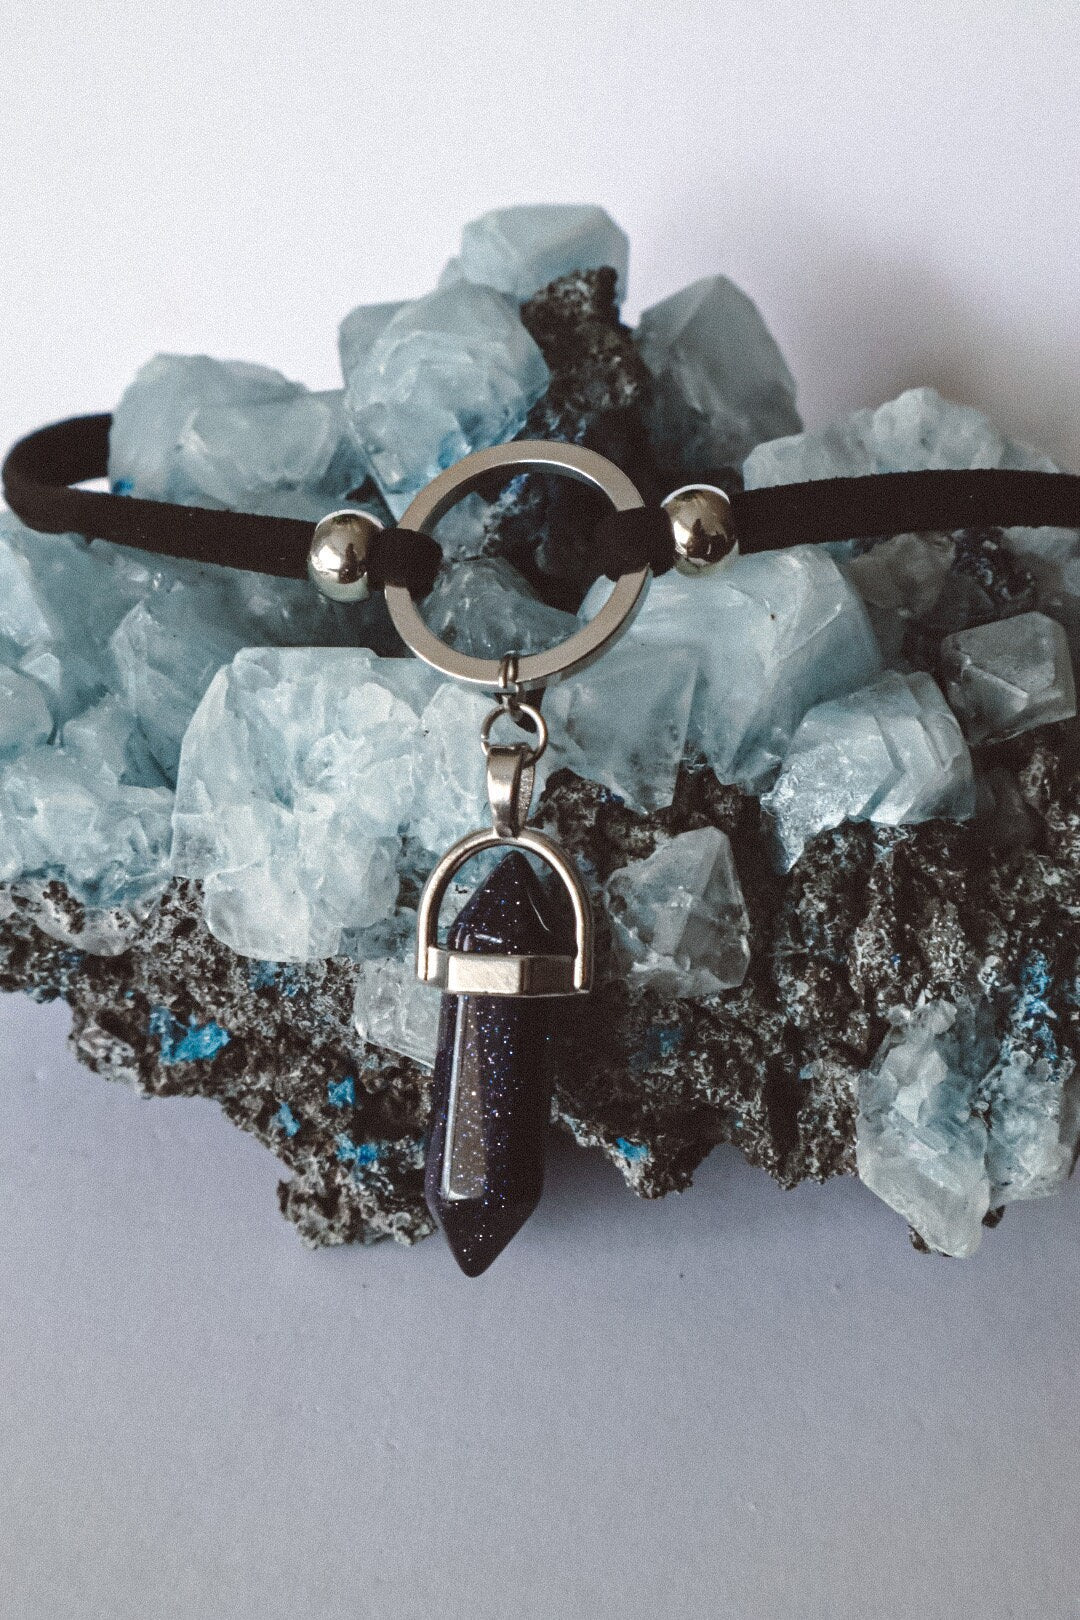 submissive day collar, day collar sub, discreet day collar, blue sandstone jewelry, o ring choker, crystal choker, gemstone jewelry, gemstone jewellery, blue sandstone necklace silver, silver jewelry blue sandstone